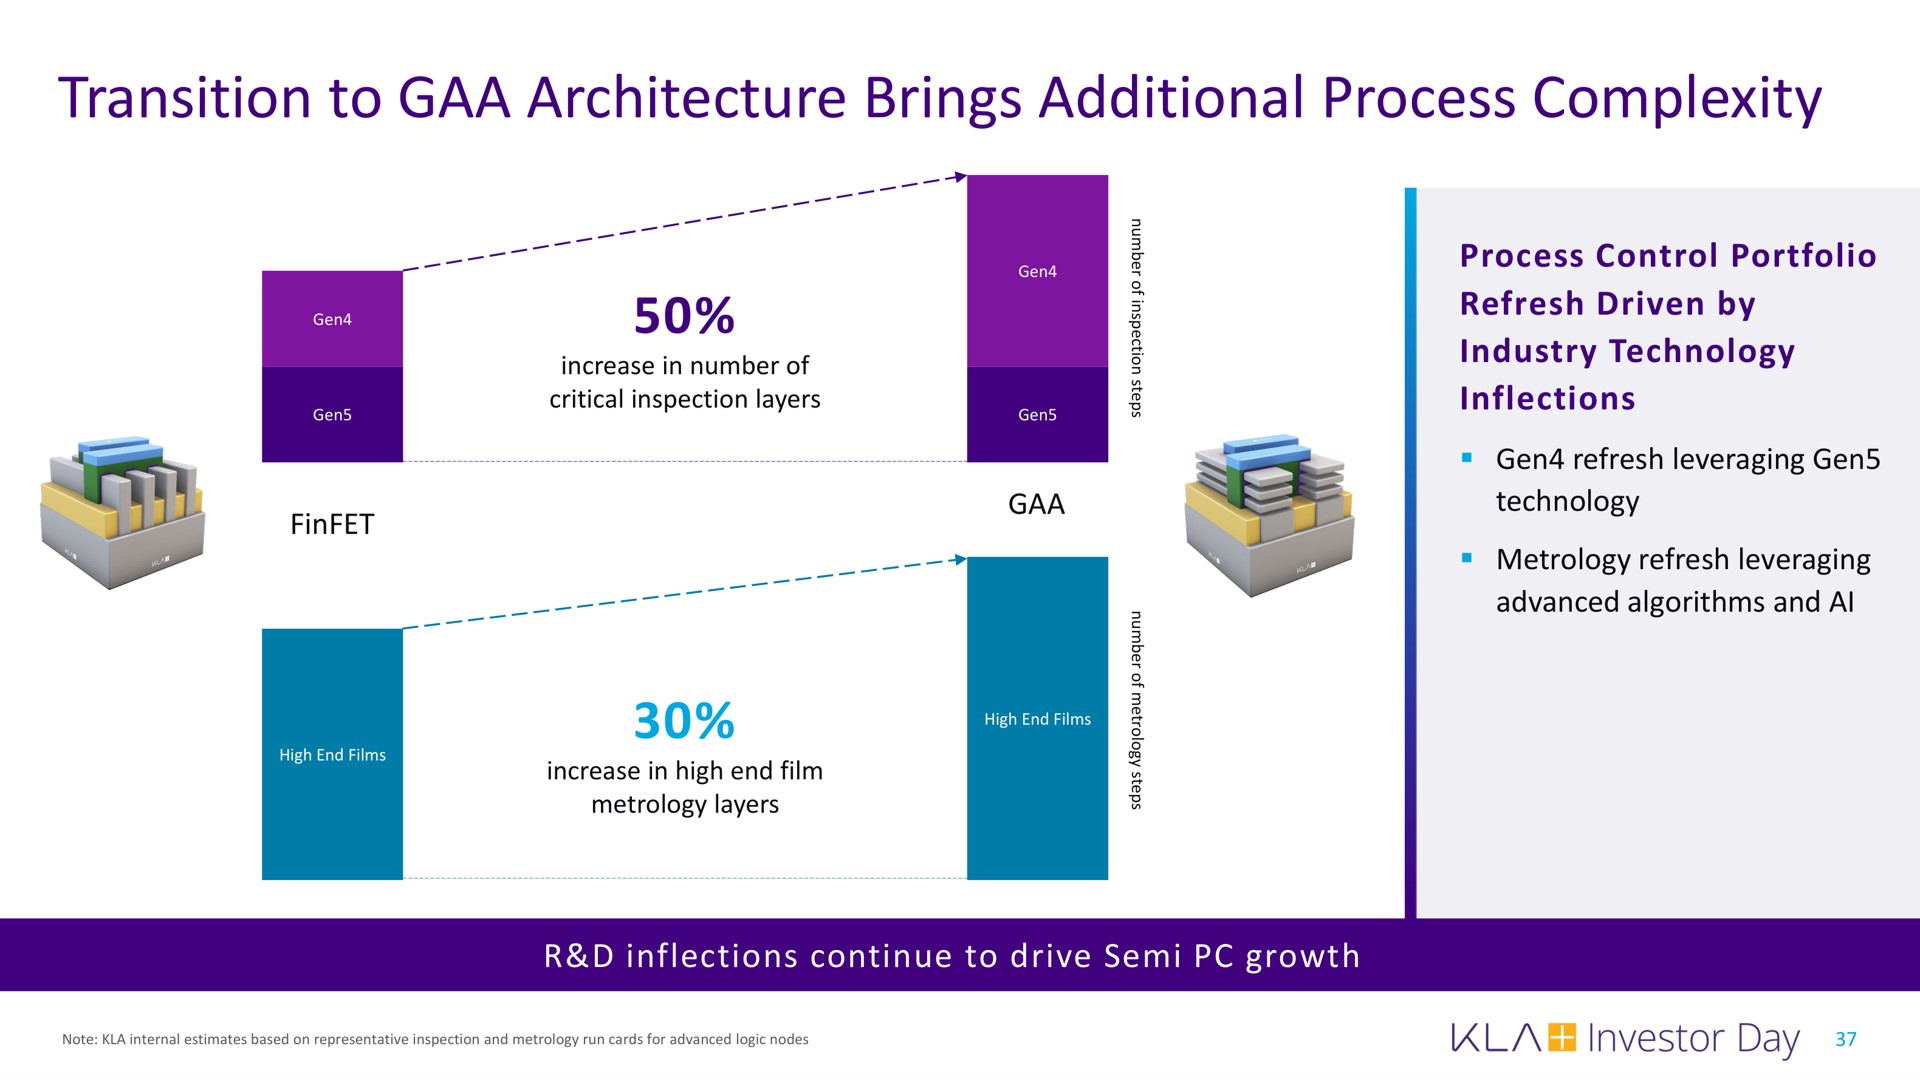 transition to architecture brings additional process complexity | KLA